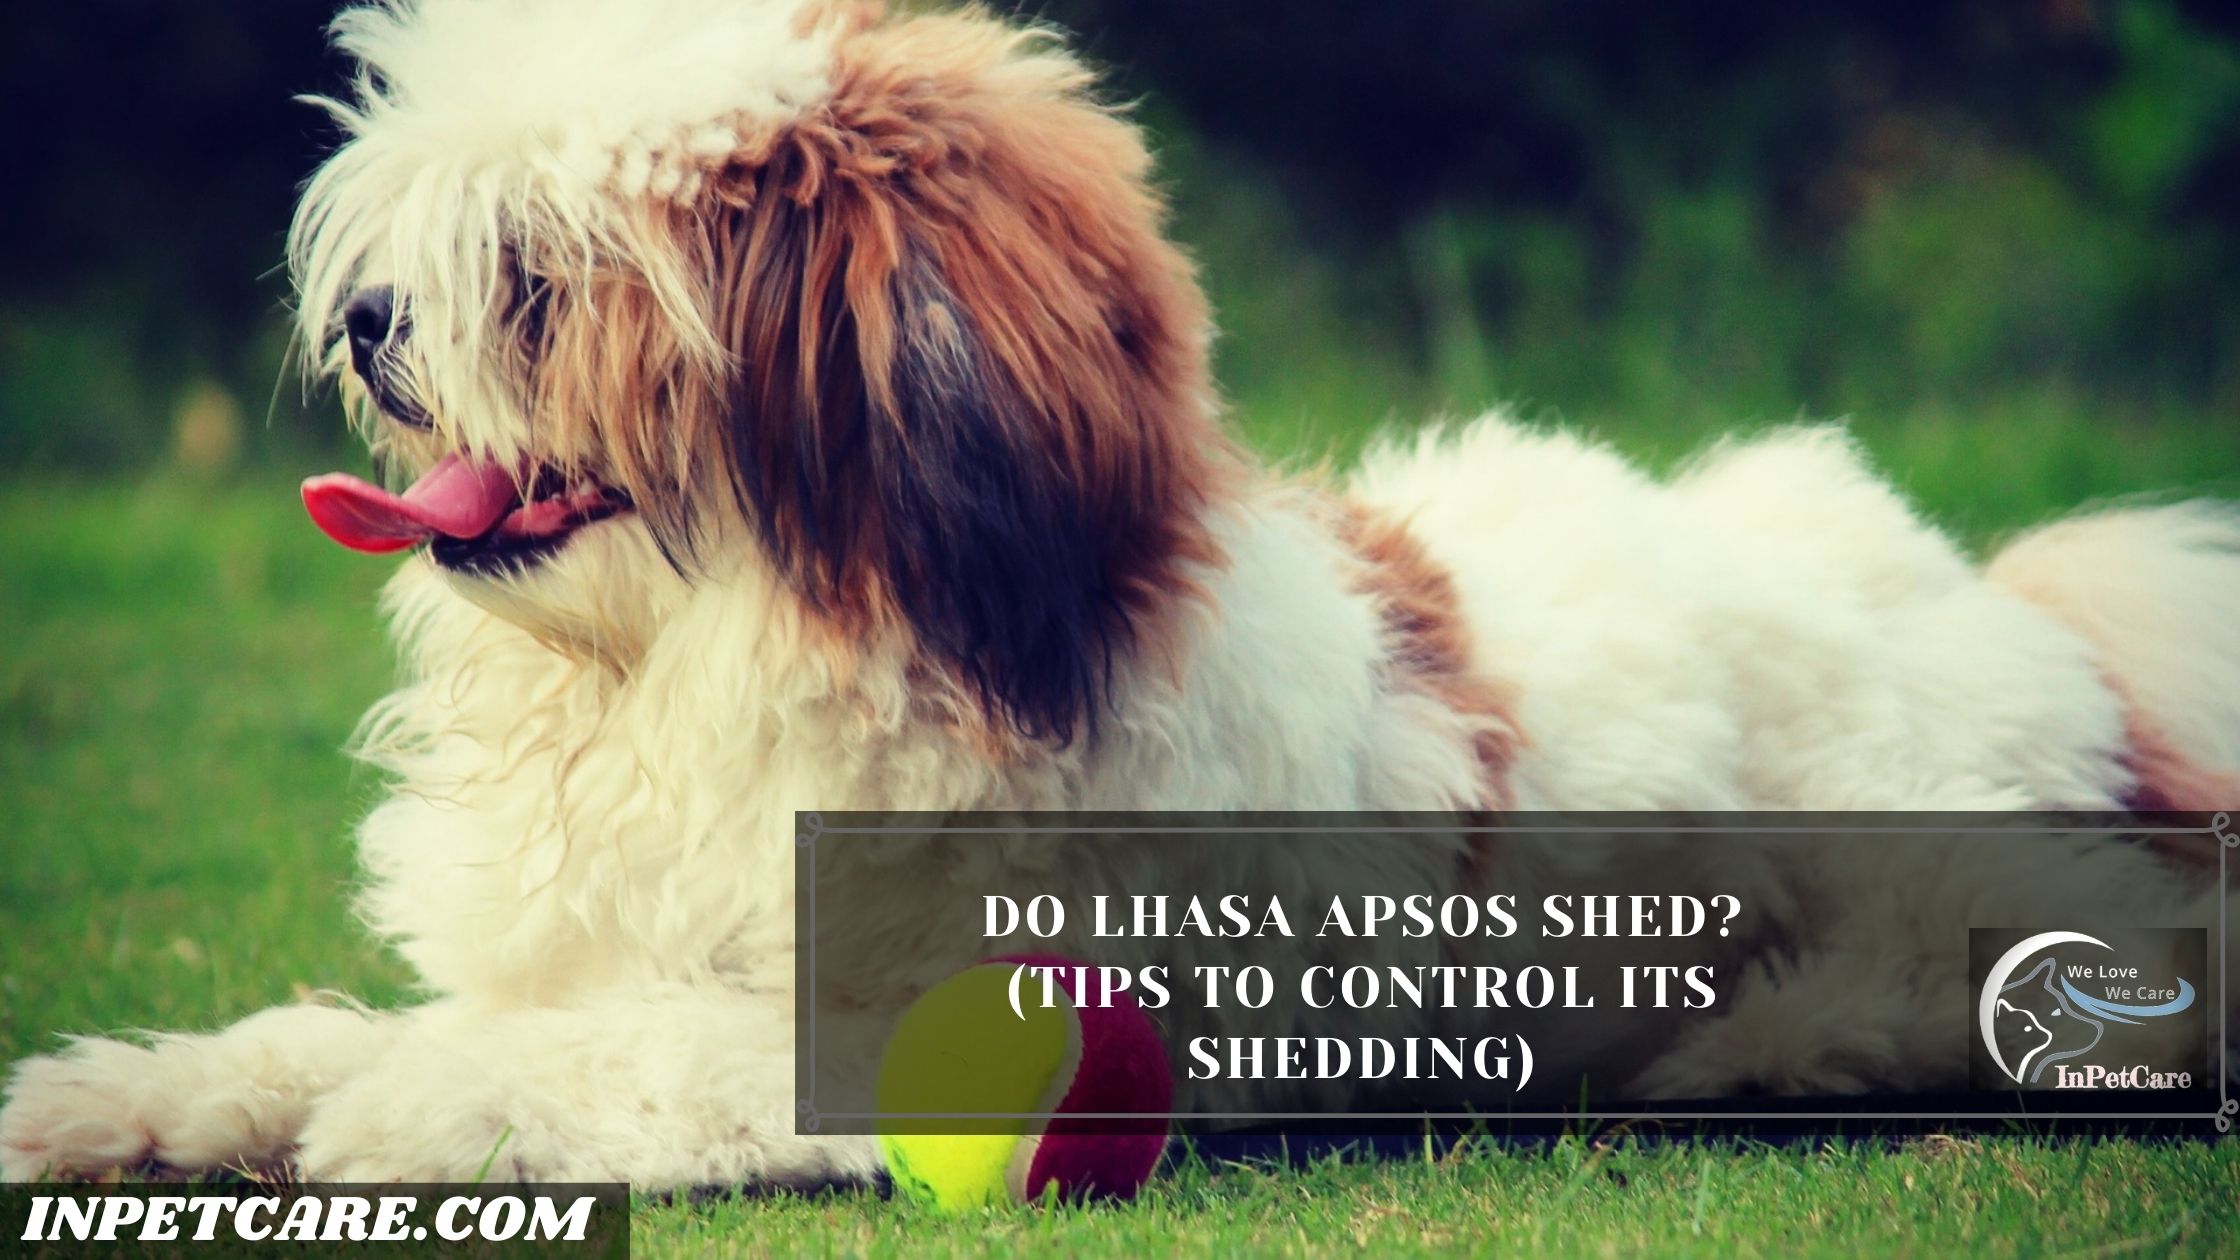 Do Lhasa Apsos Shed? (Tips To Control Its Shedding)